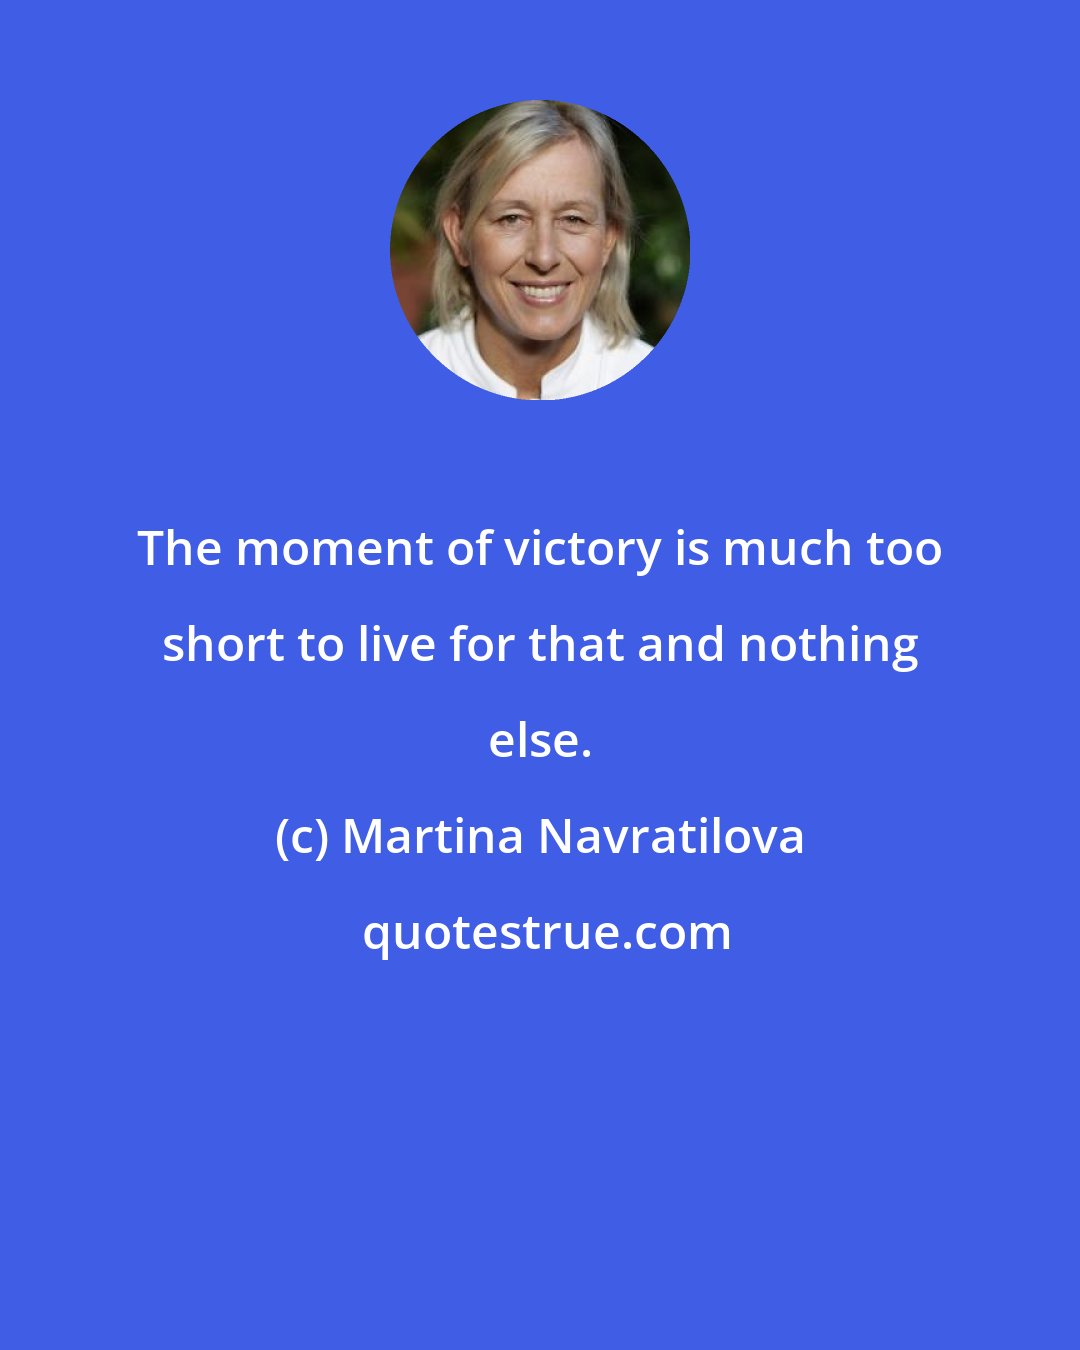 Martina Navratilova: The moment of victory is much too short to live for that and nothing else.